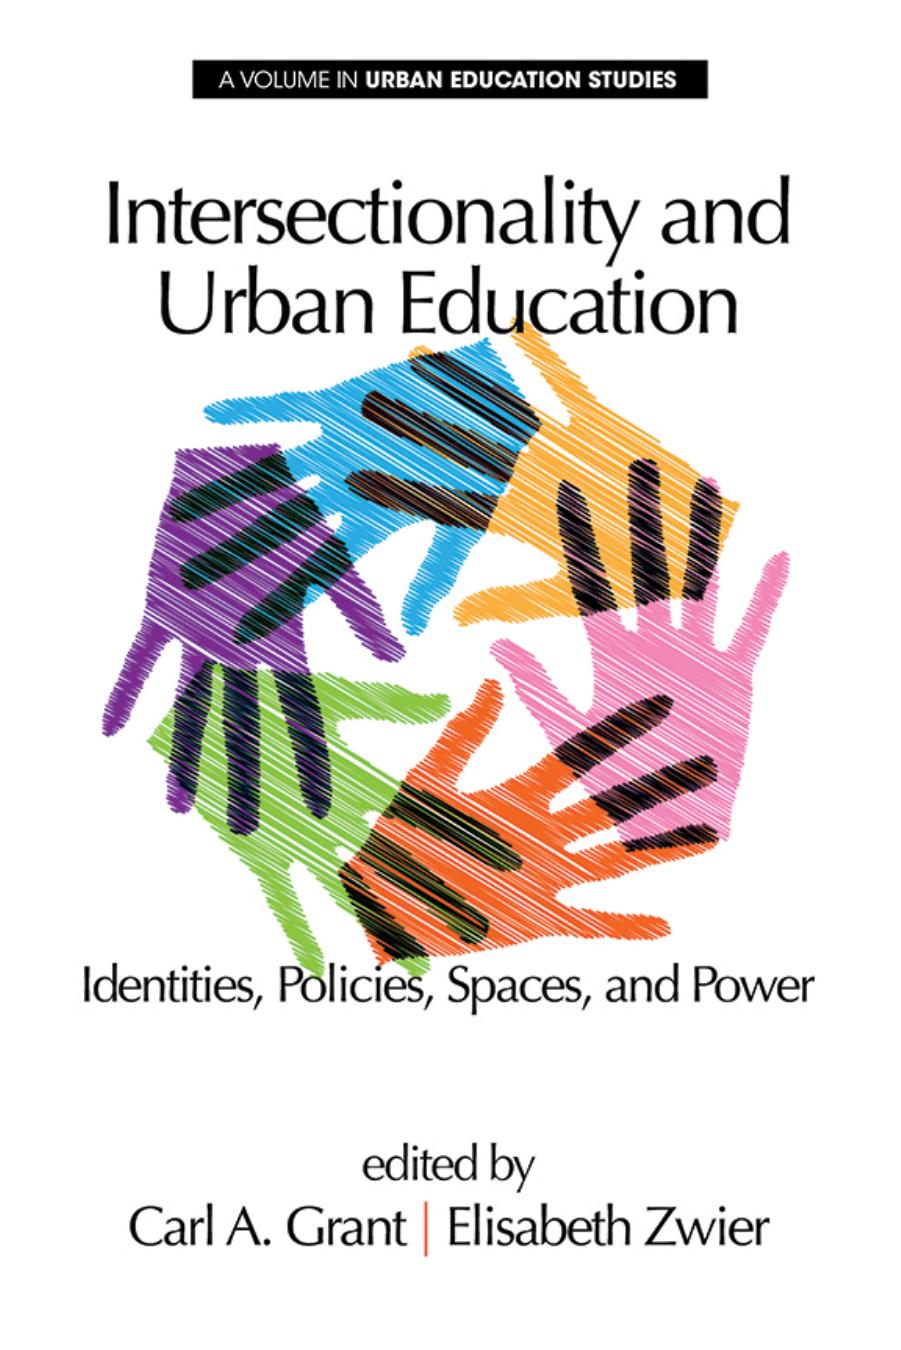 Intersectionality and Urban Education : Identities, Policies, Spaces and Power by Carl A. Grant; Elisabeth Zwier